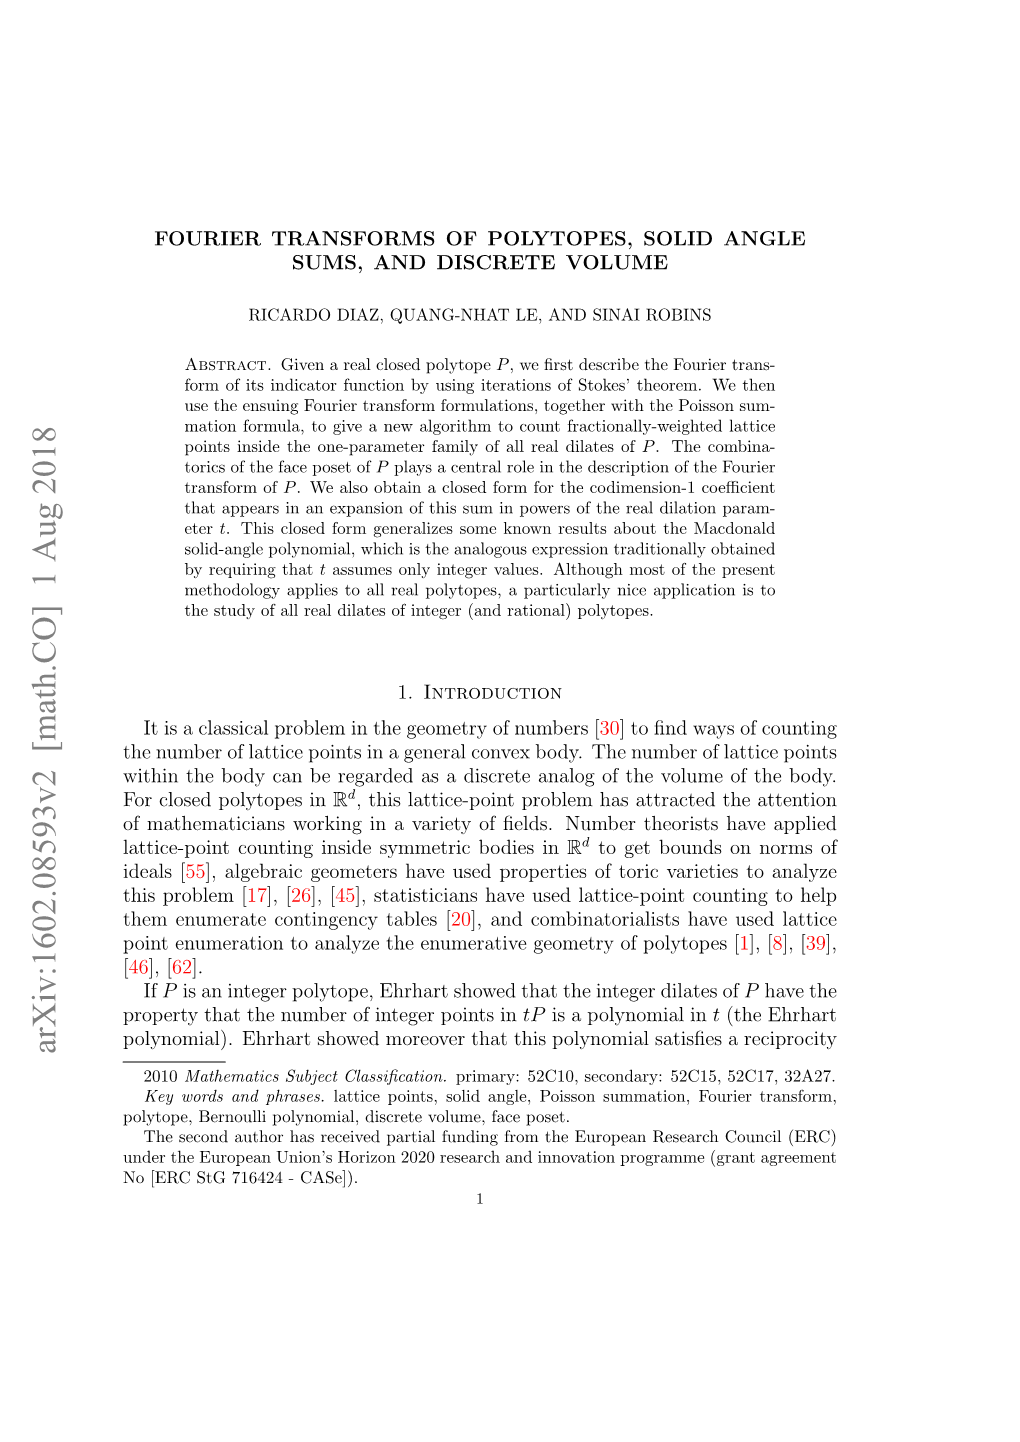 Fourier Transforms of Polytopes, Solid Angle Sums, and Discrete Volume